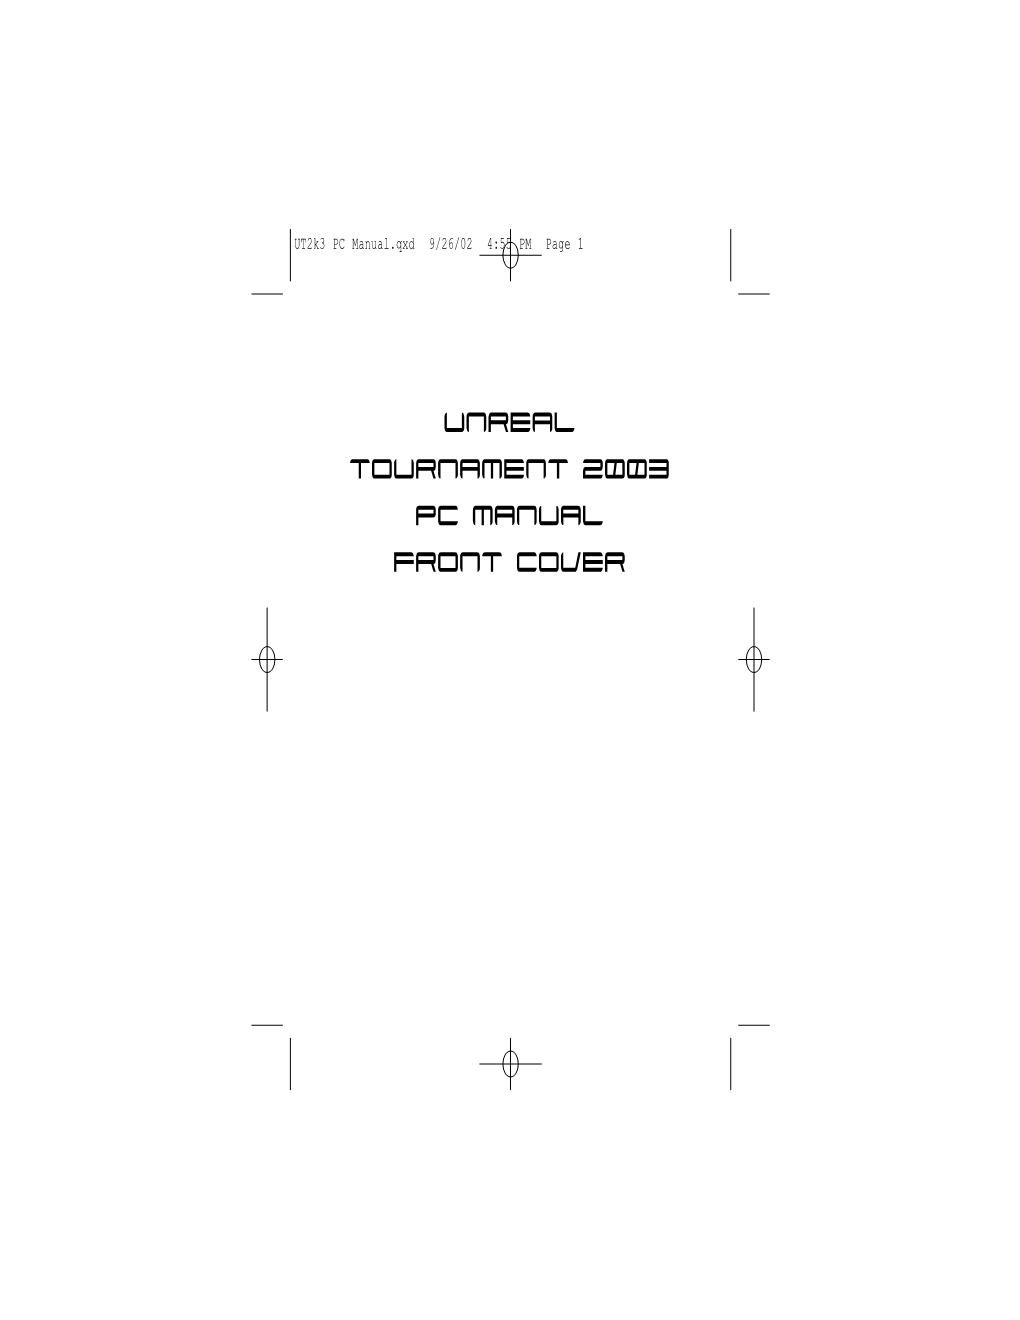 UNREAL TOURNAMENT 2003 PC MANUAL Front Cover Ut2k3 PC Manual.Qxd 9/26/02 4:55 PM Page 2